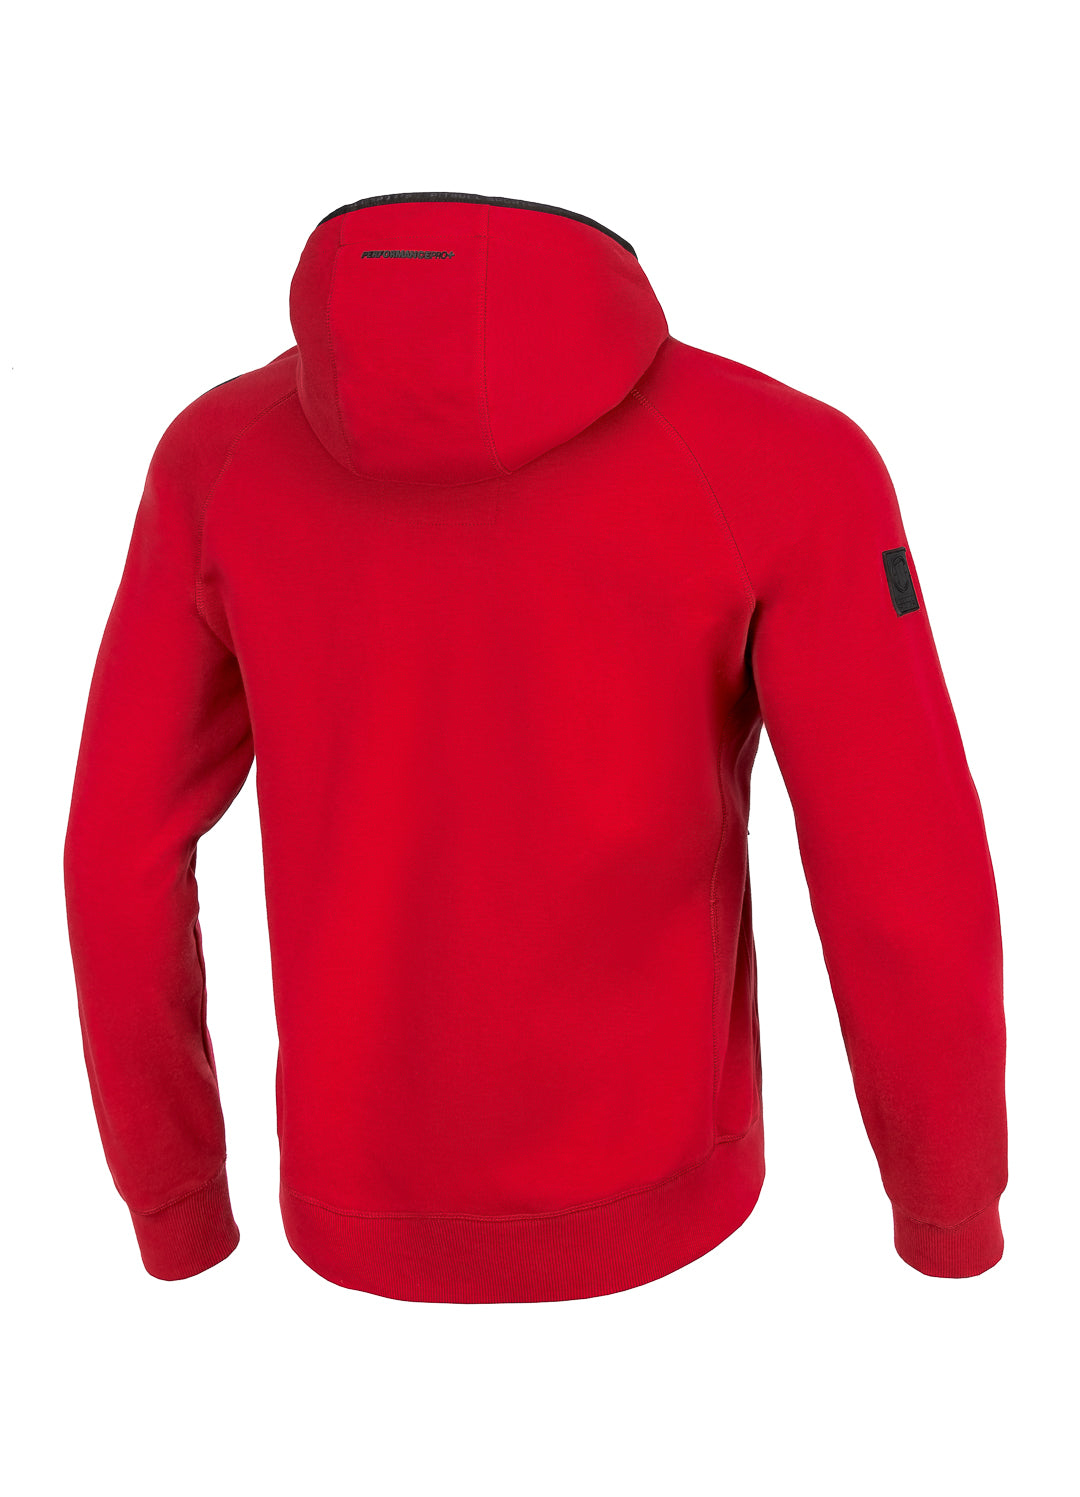 FALCON HILLTOP Red Hoodie.